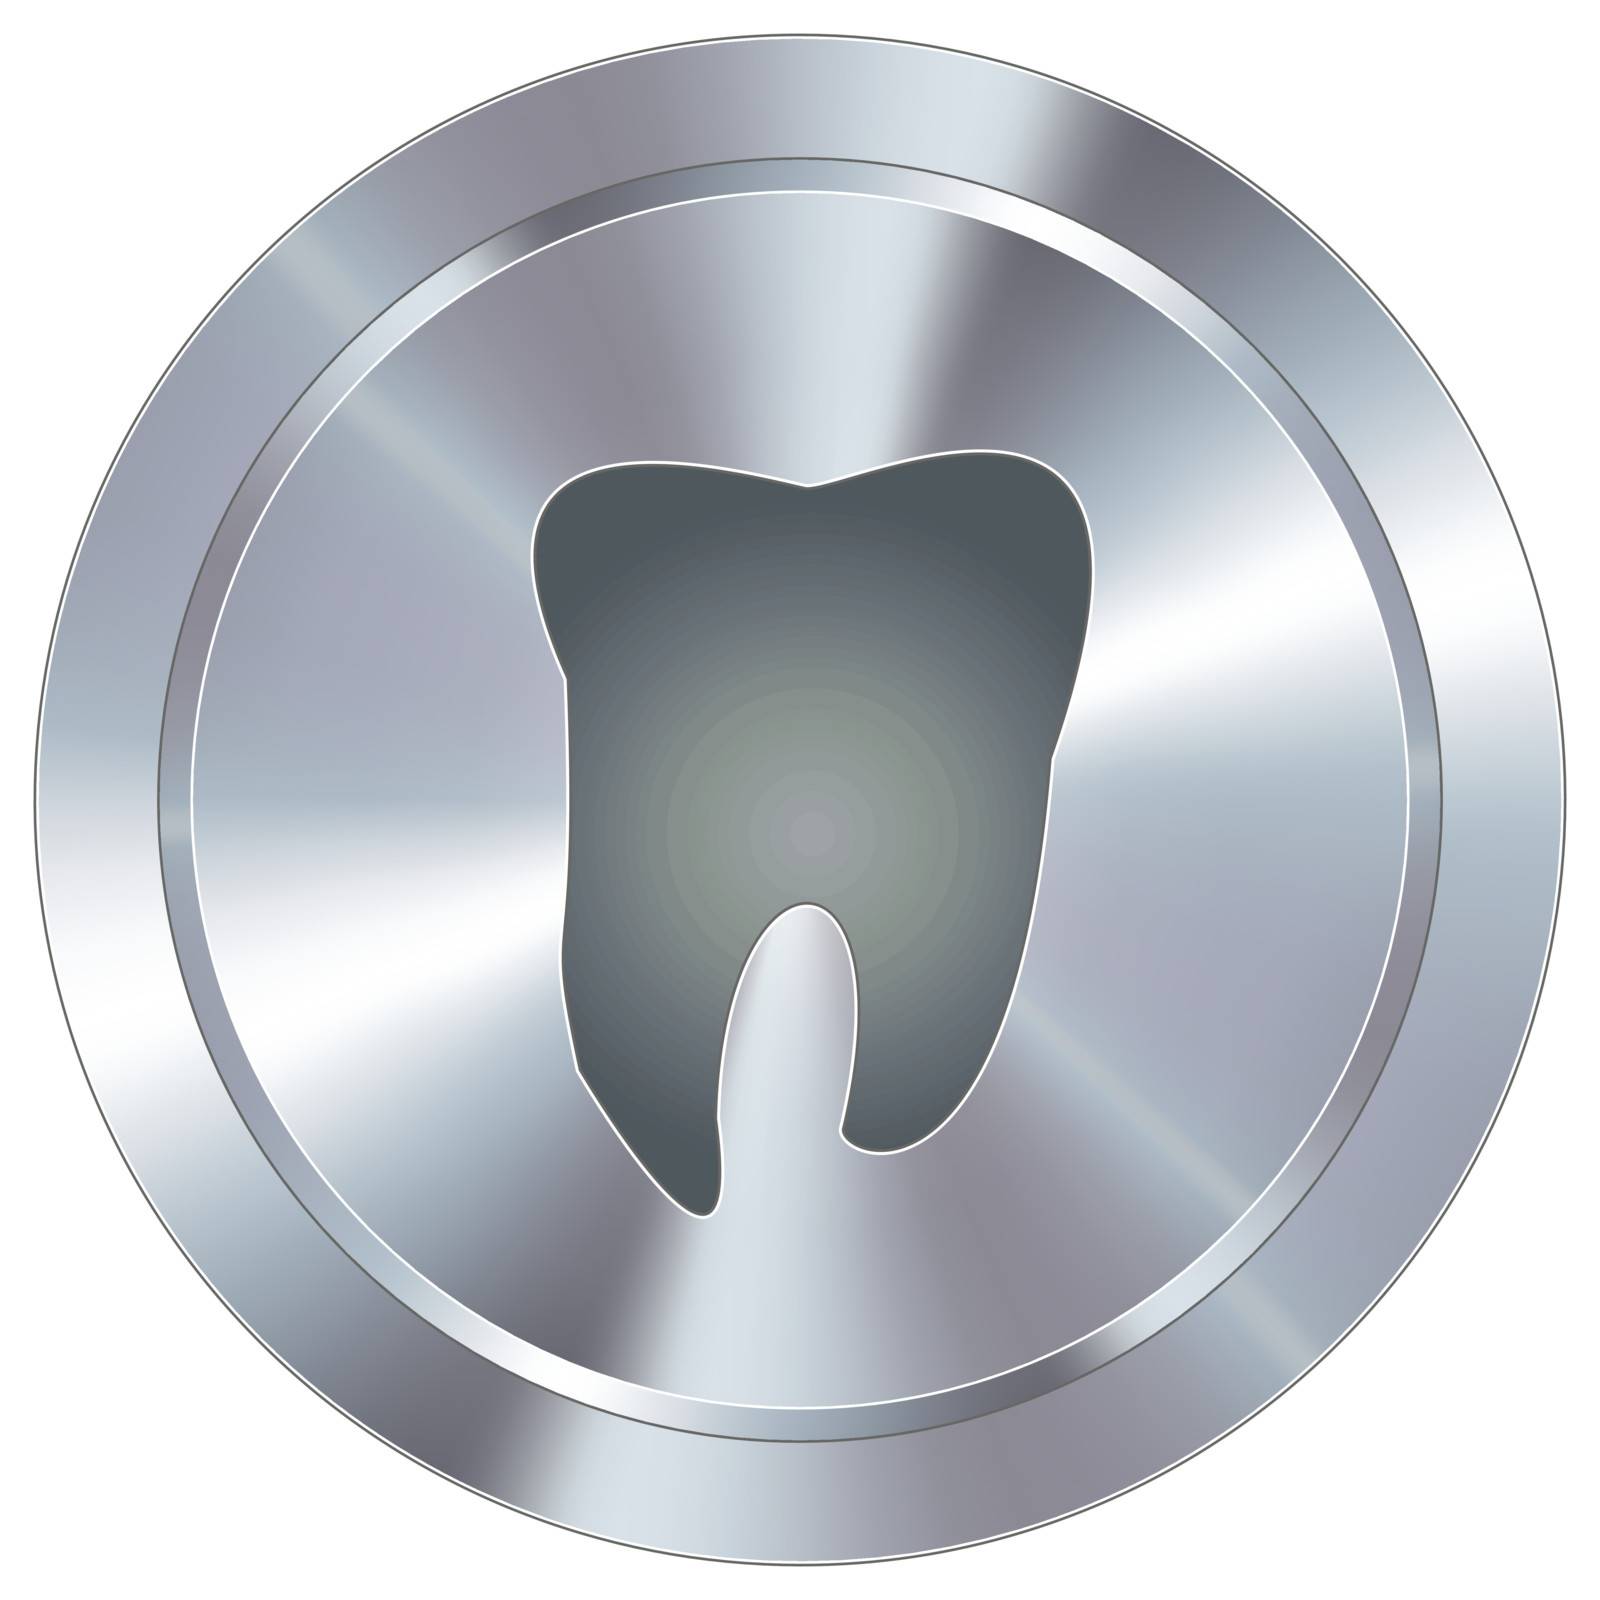 Tooth industrial button by lhfgraphics